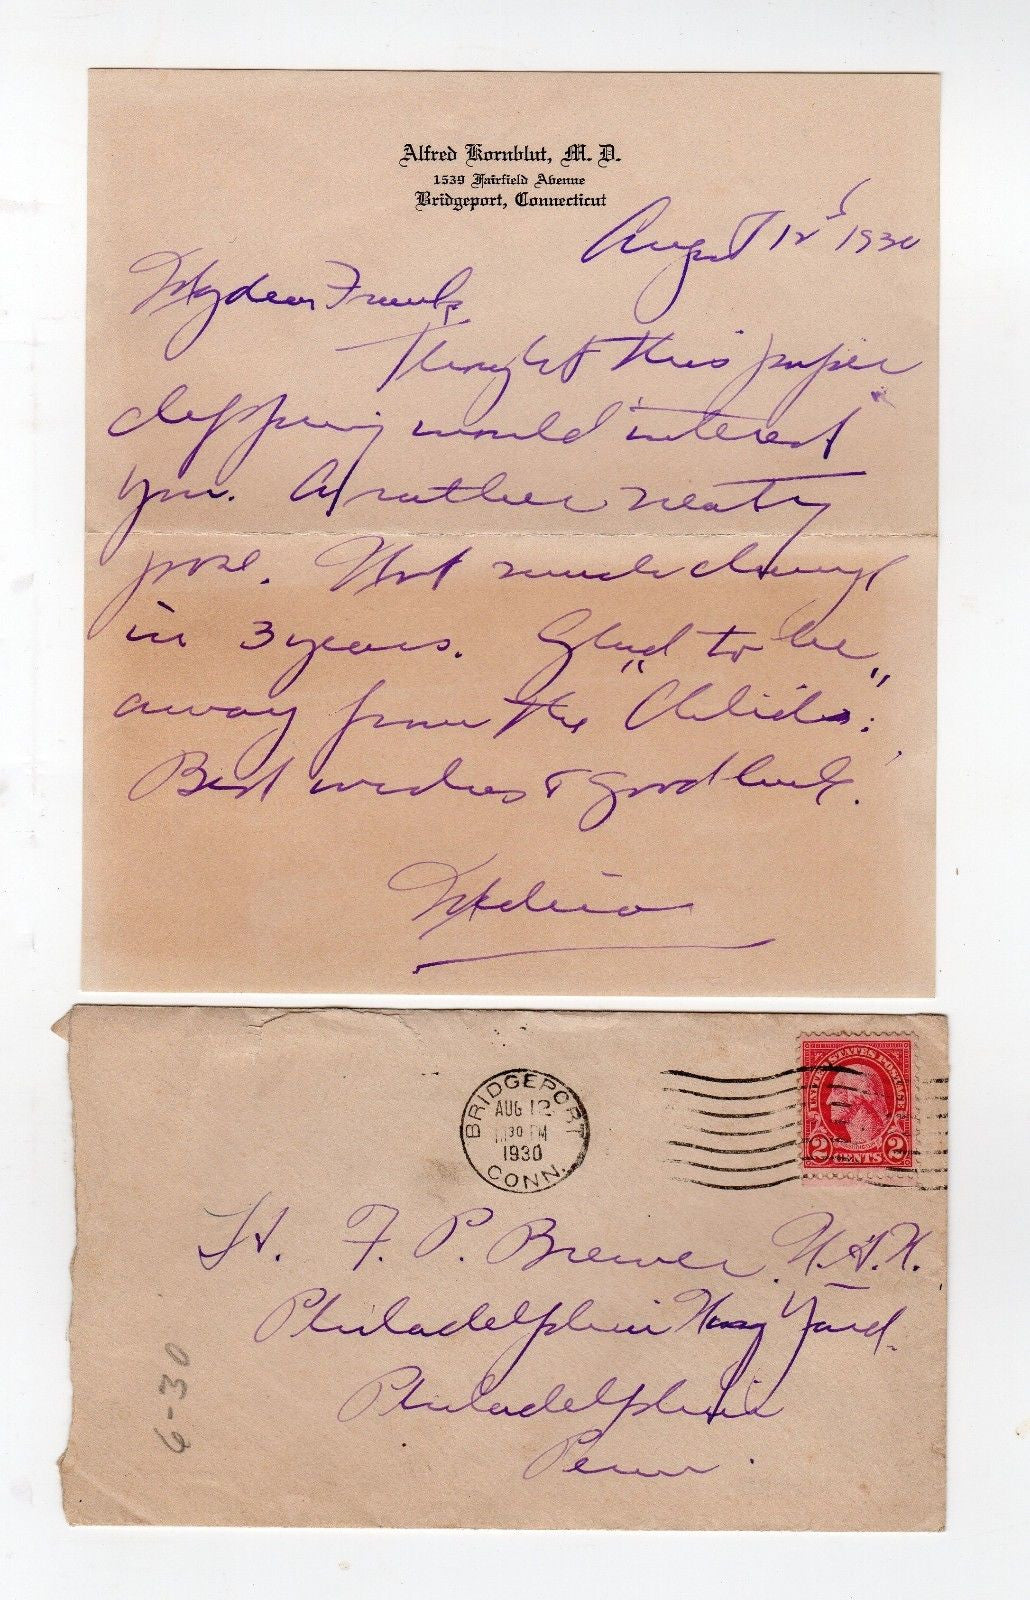 DR. ALFRED KORNBLUT CT WEST VIRGINIA DOCTOR AUTOGRAPH SIGNED NAVY LETTER 1930 - K-townConsignments